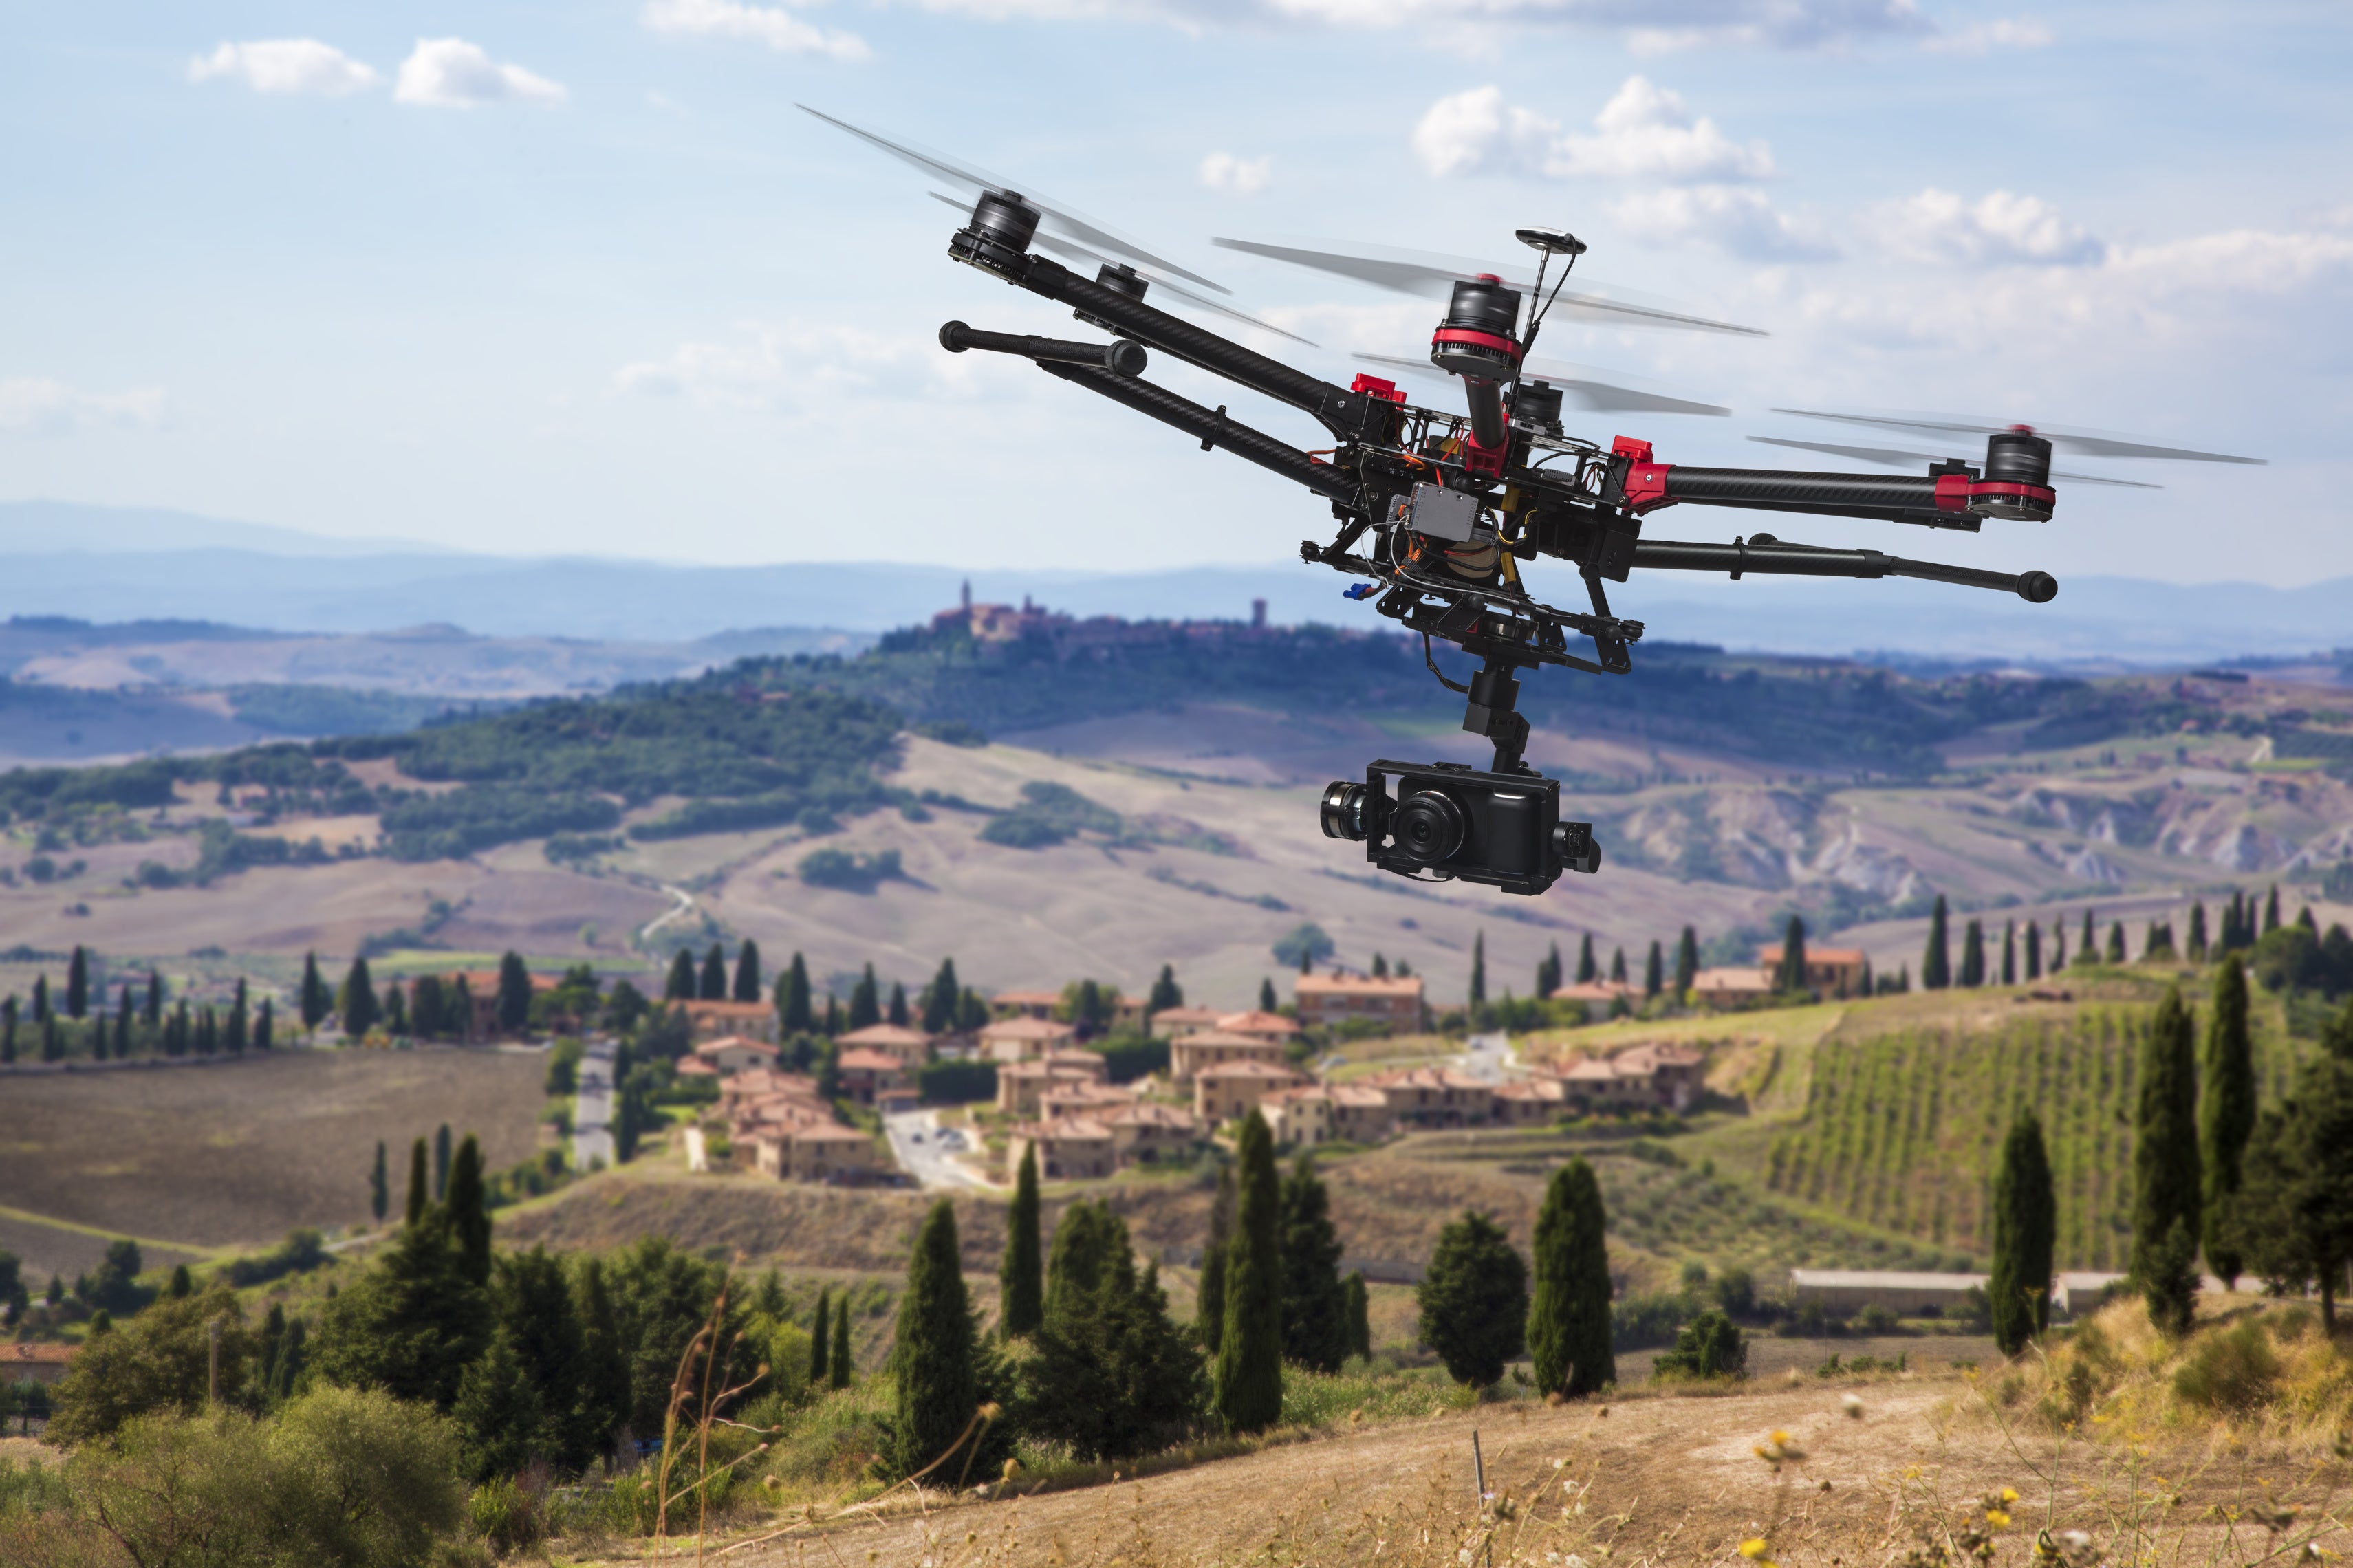 $127bn drone market set to disrupt infrastructure, agriculture and transport